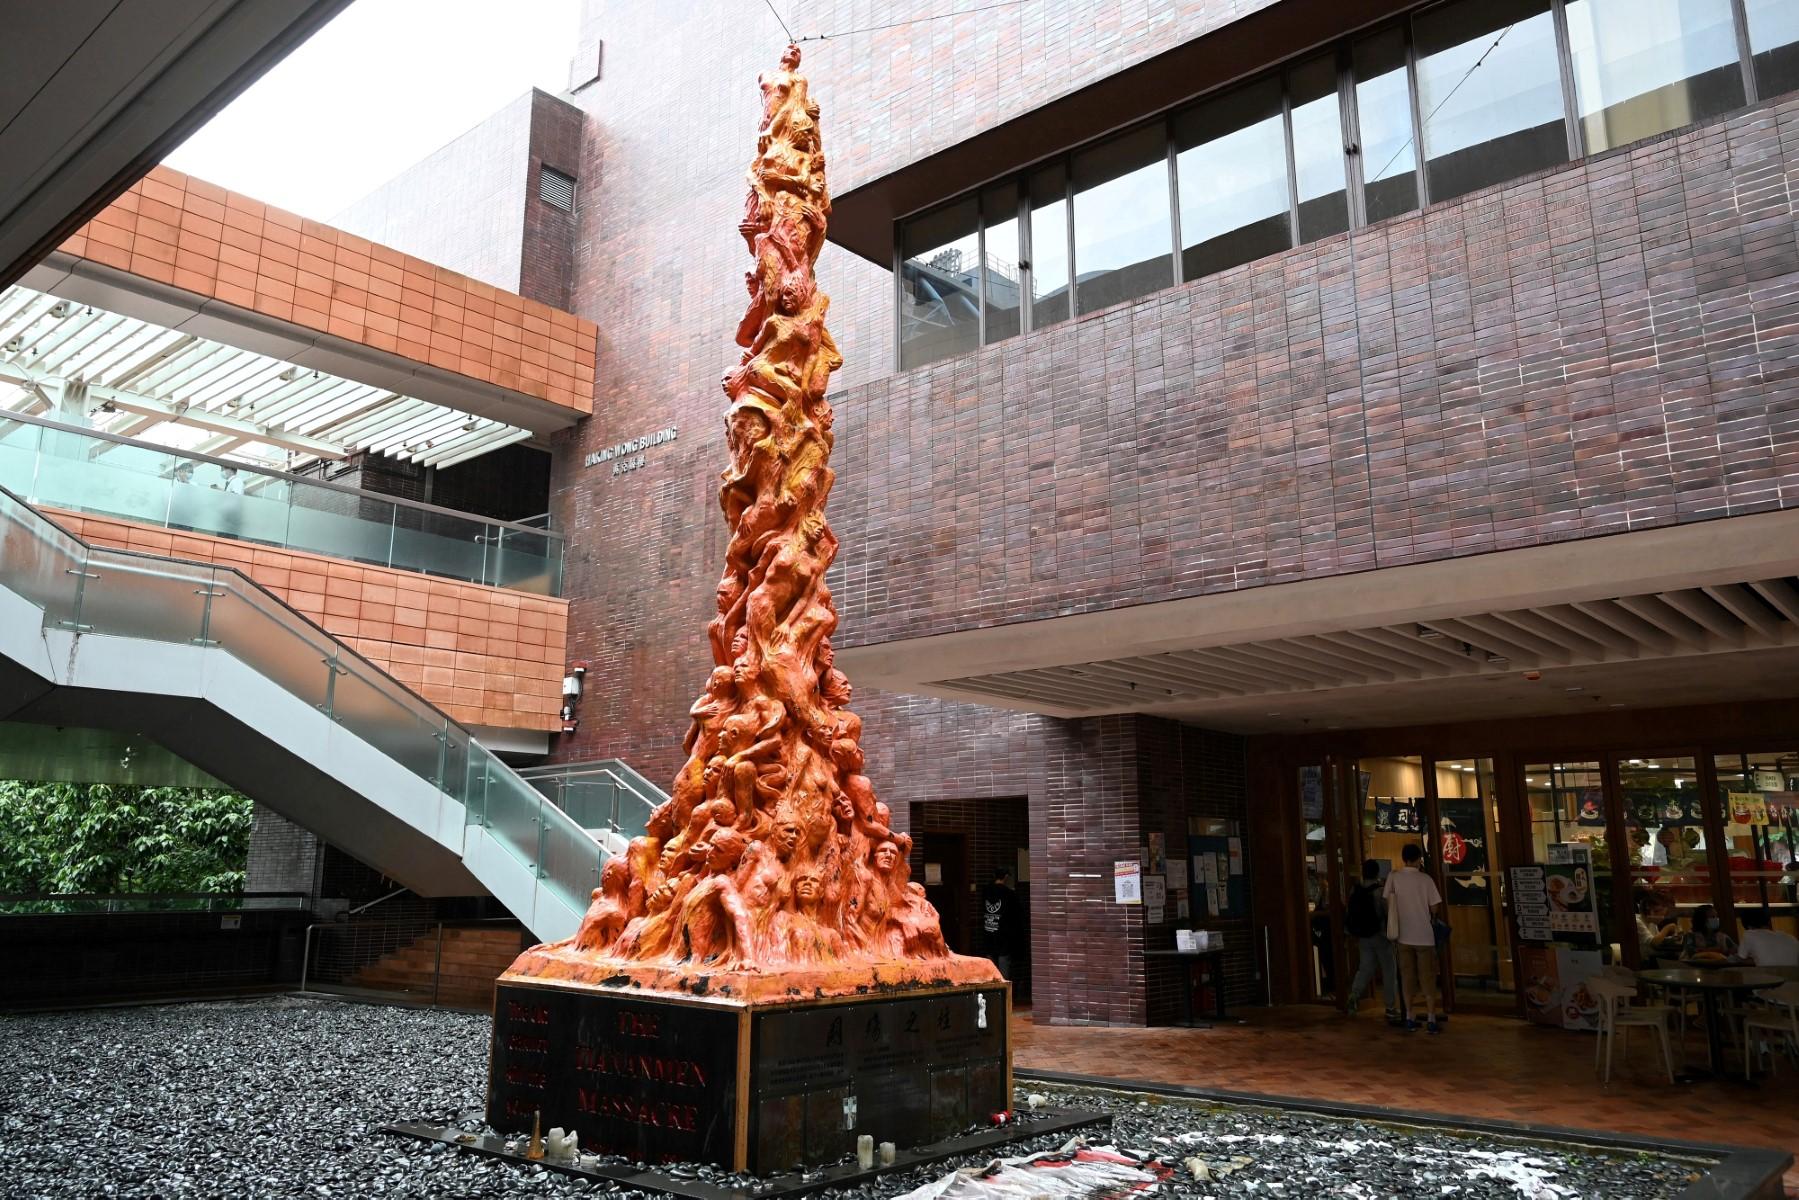 This file photo taken on Oct 10, shows the 'Pillar of Shame', a statue that commemorates the victims of the 1989 Tiananmen Square crackdown in Beijing, at the University of Hong Kong. Photo: AFP